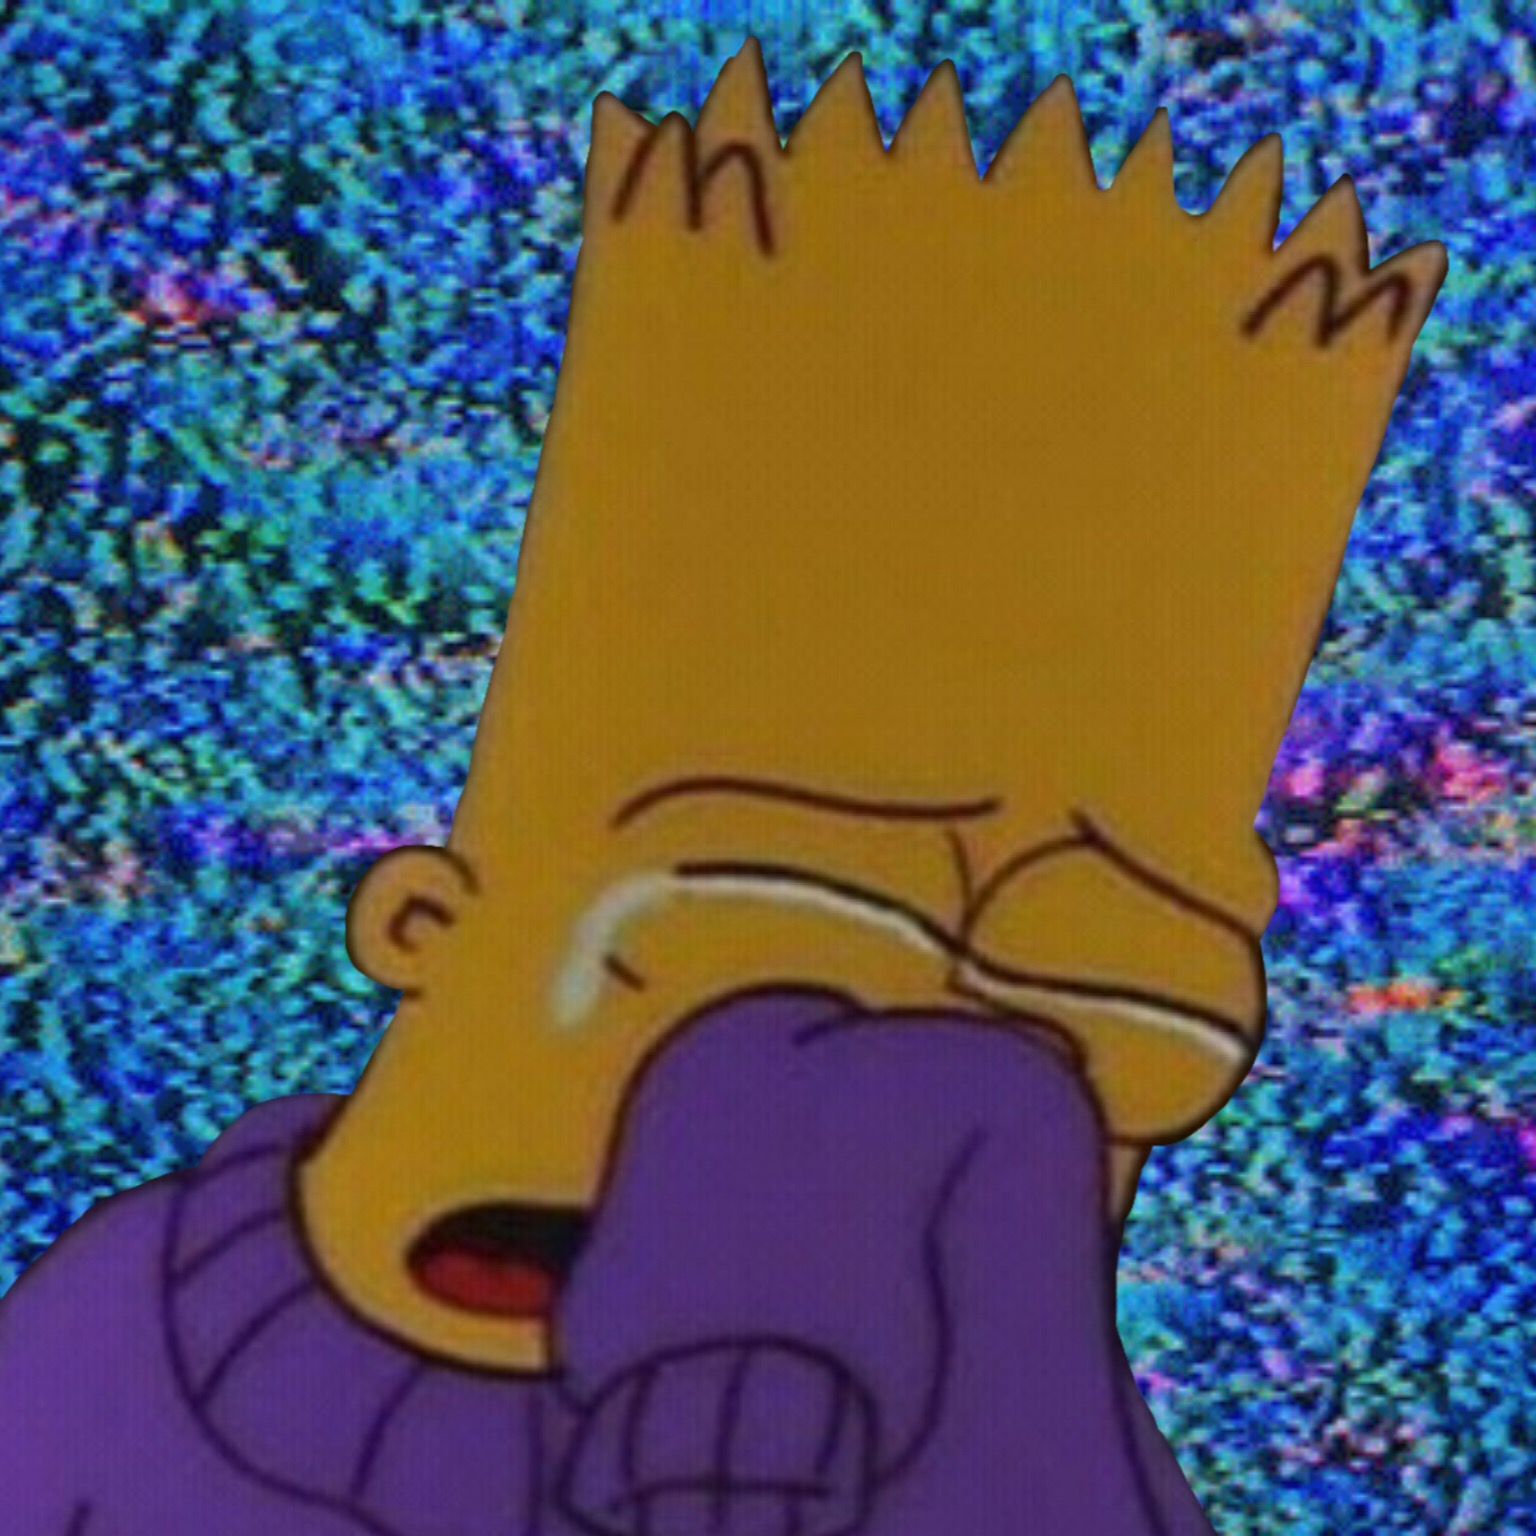 sad bart thesimpsons simpsons mood - Image by LXV